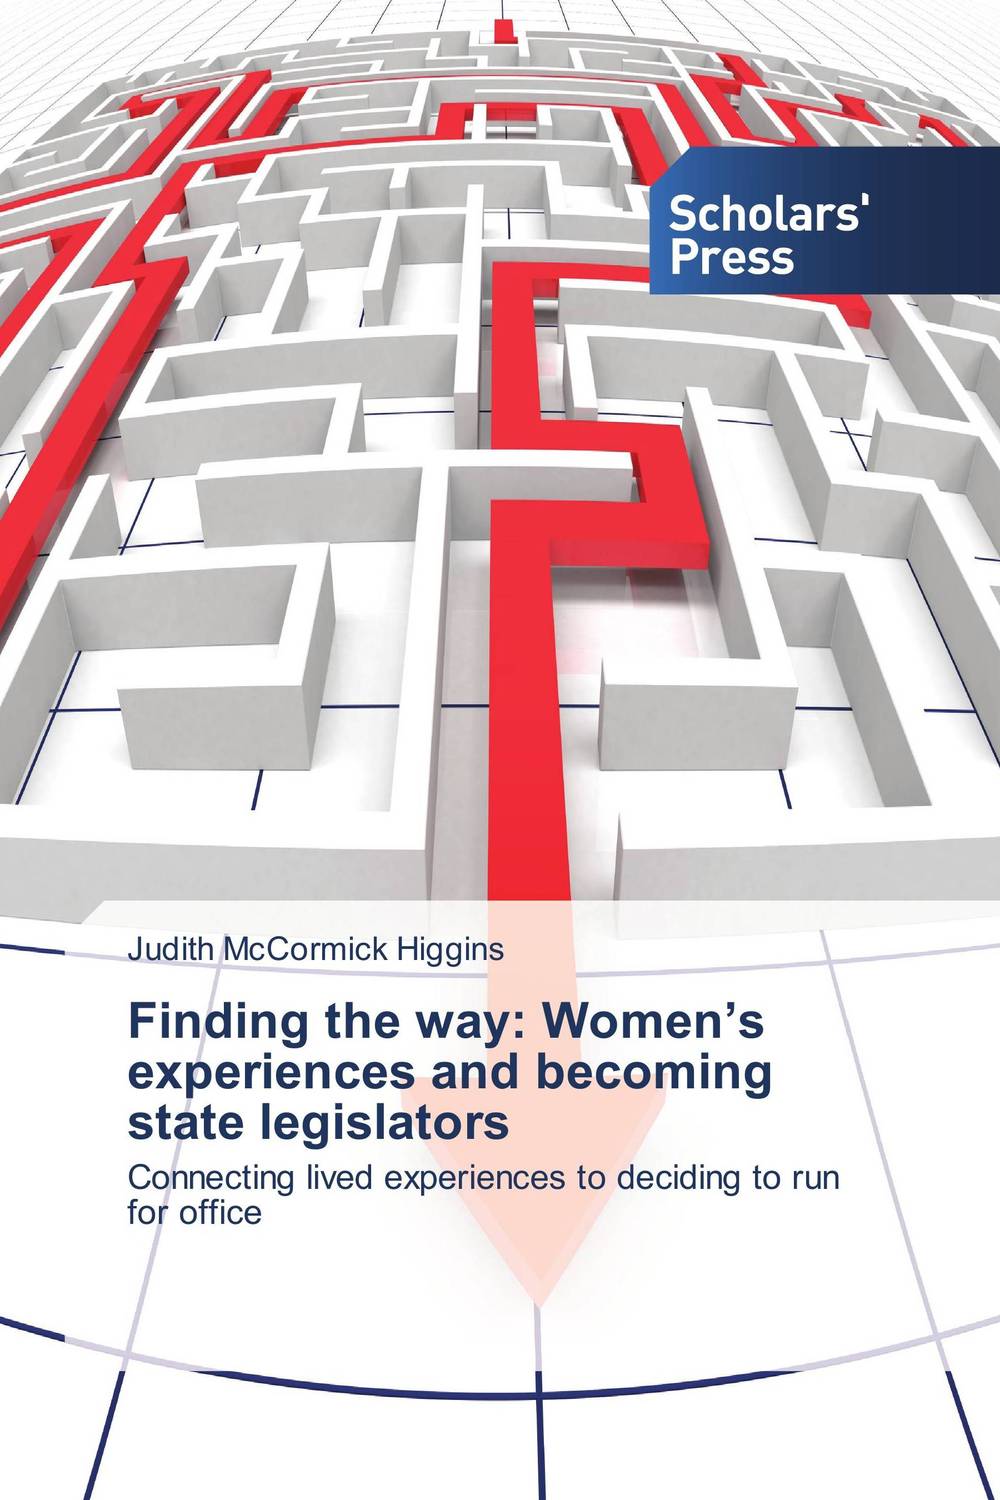 Finding the way: Women’s experiences and becoming state legislators